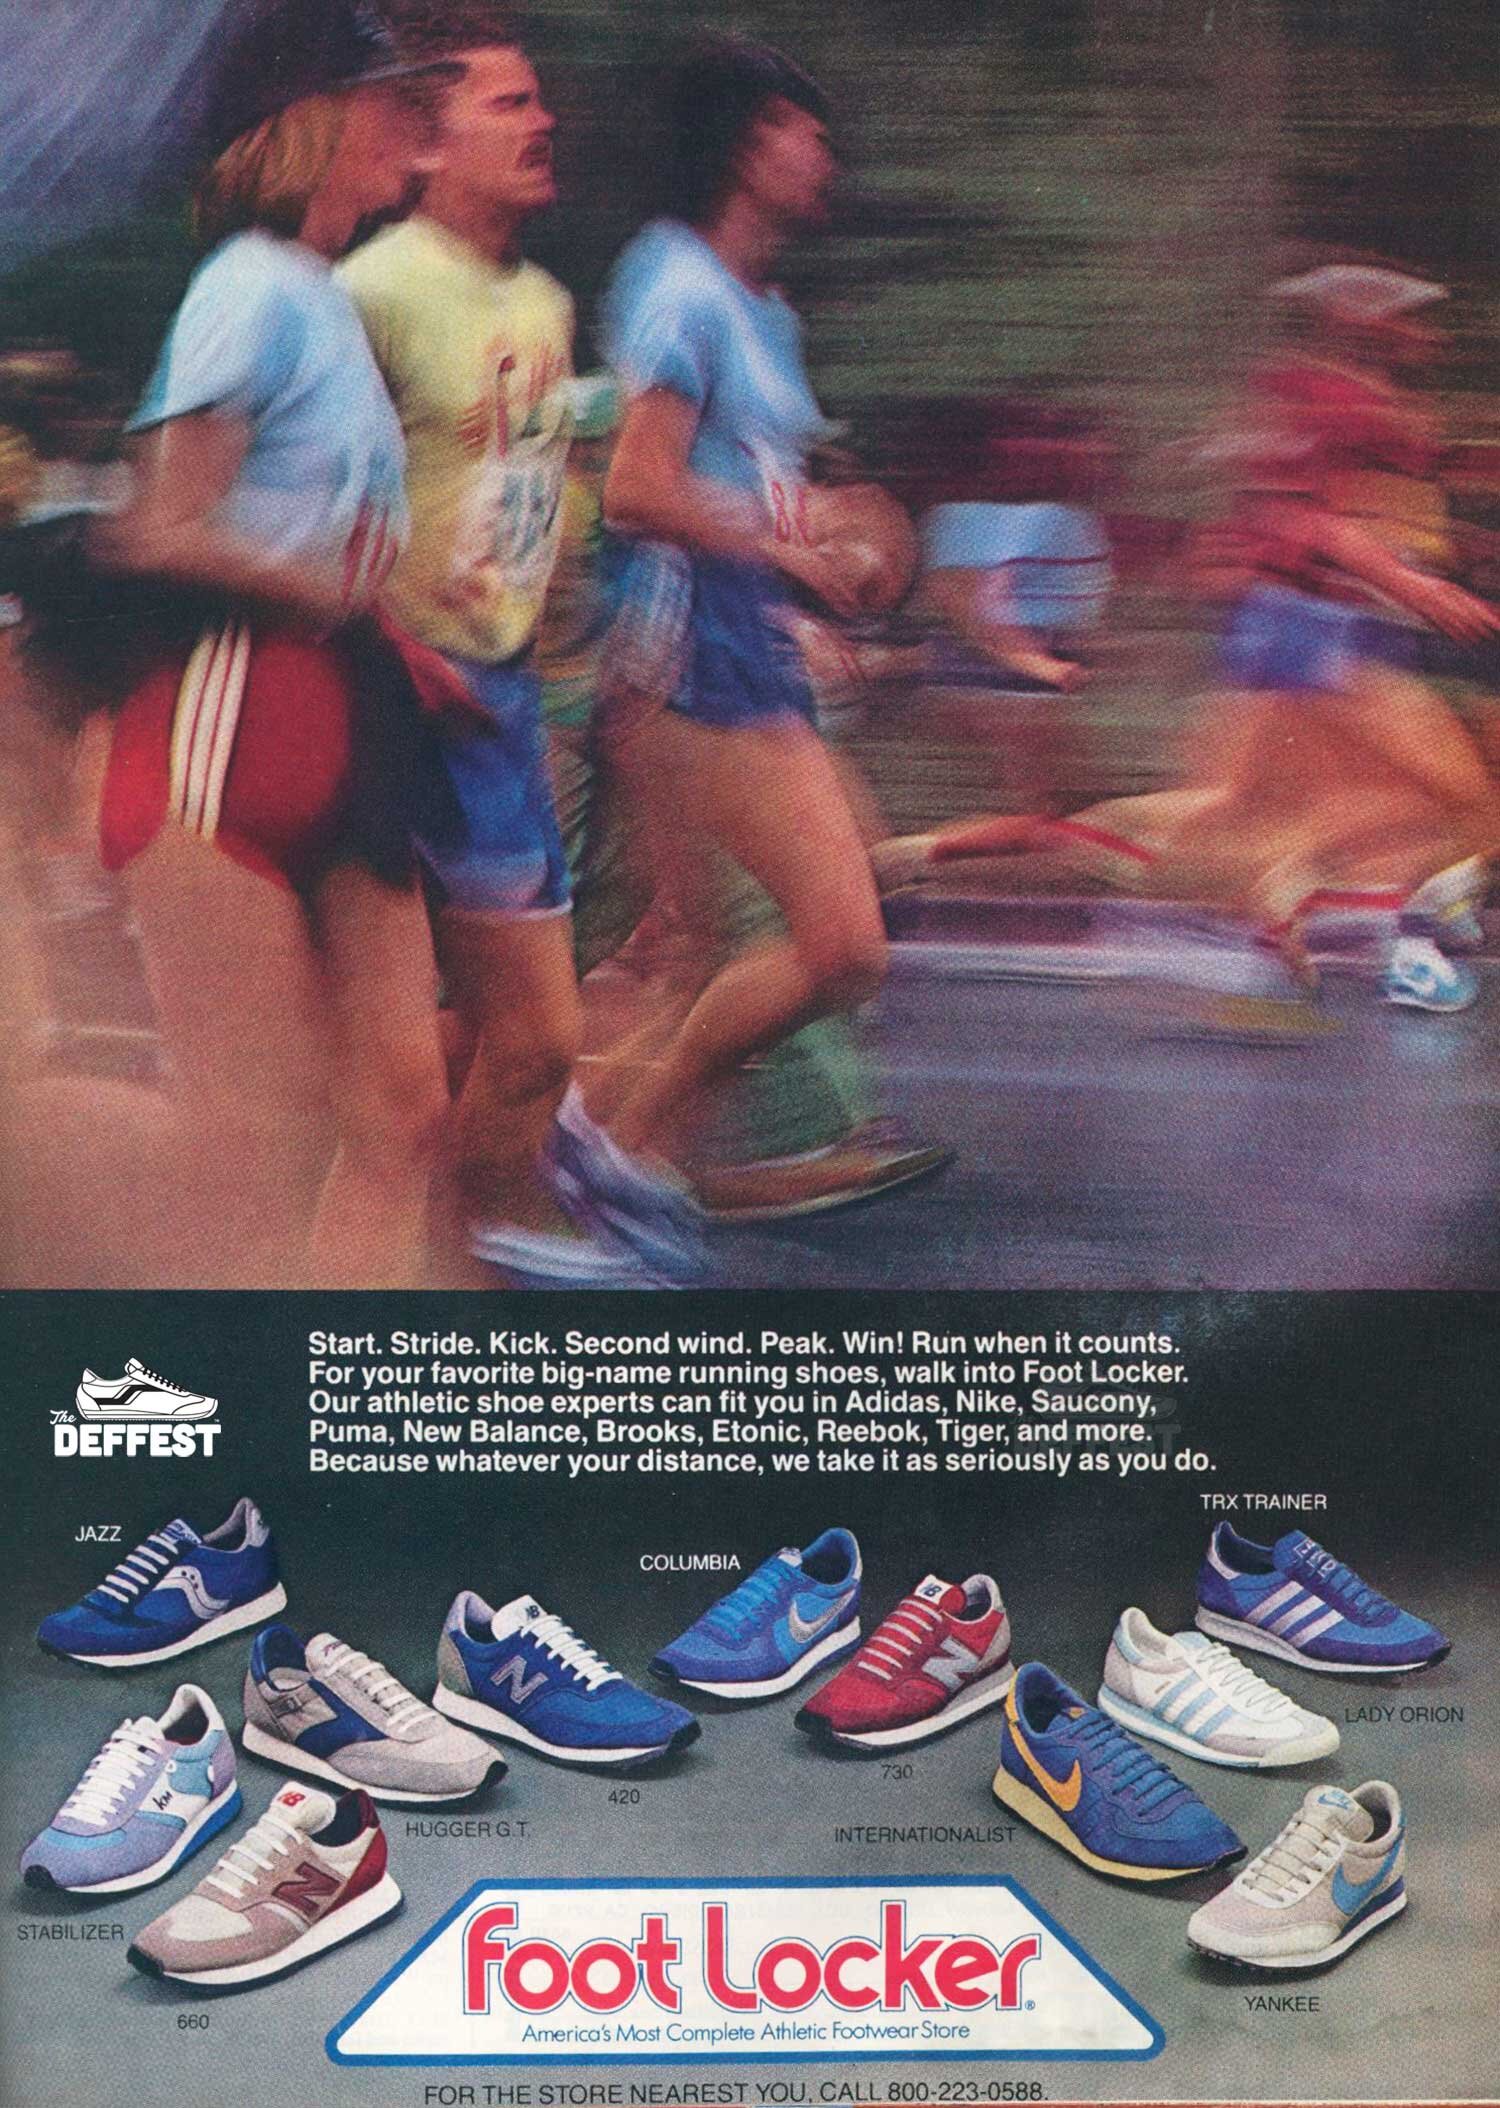 tornillo Incentivo haz foot locker — The Deffest®. A vintage and retro sneaker blog. — Vintage Ads